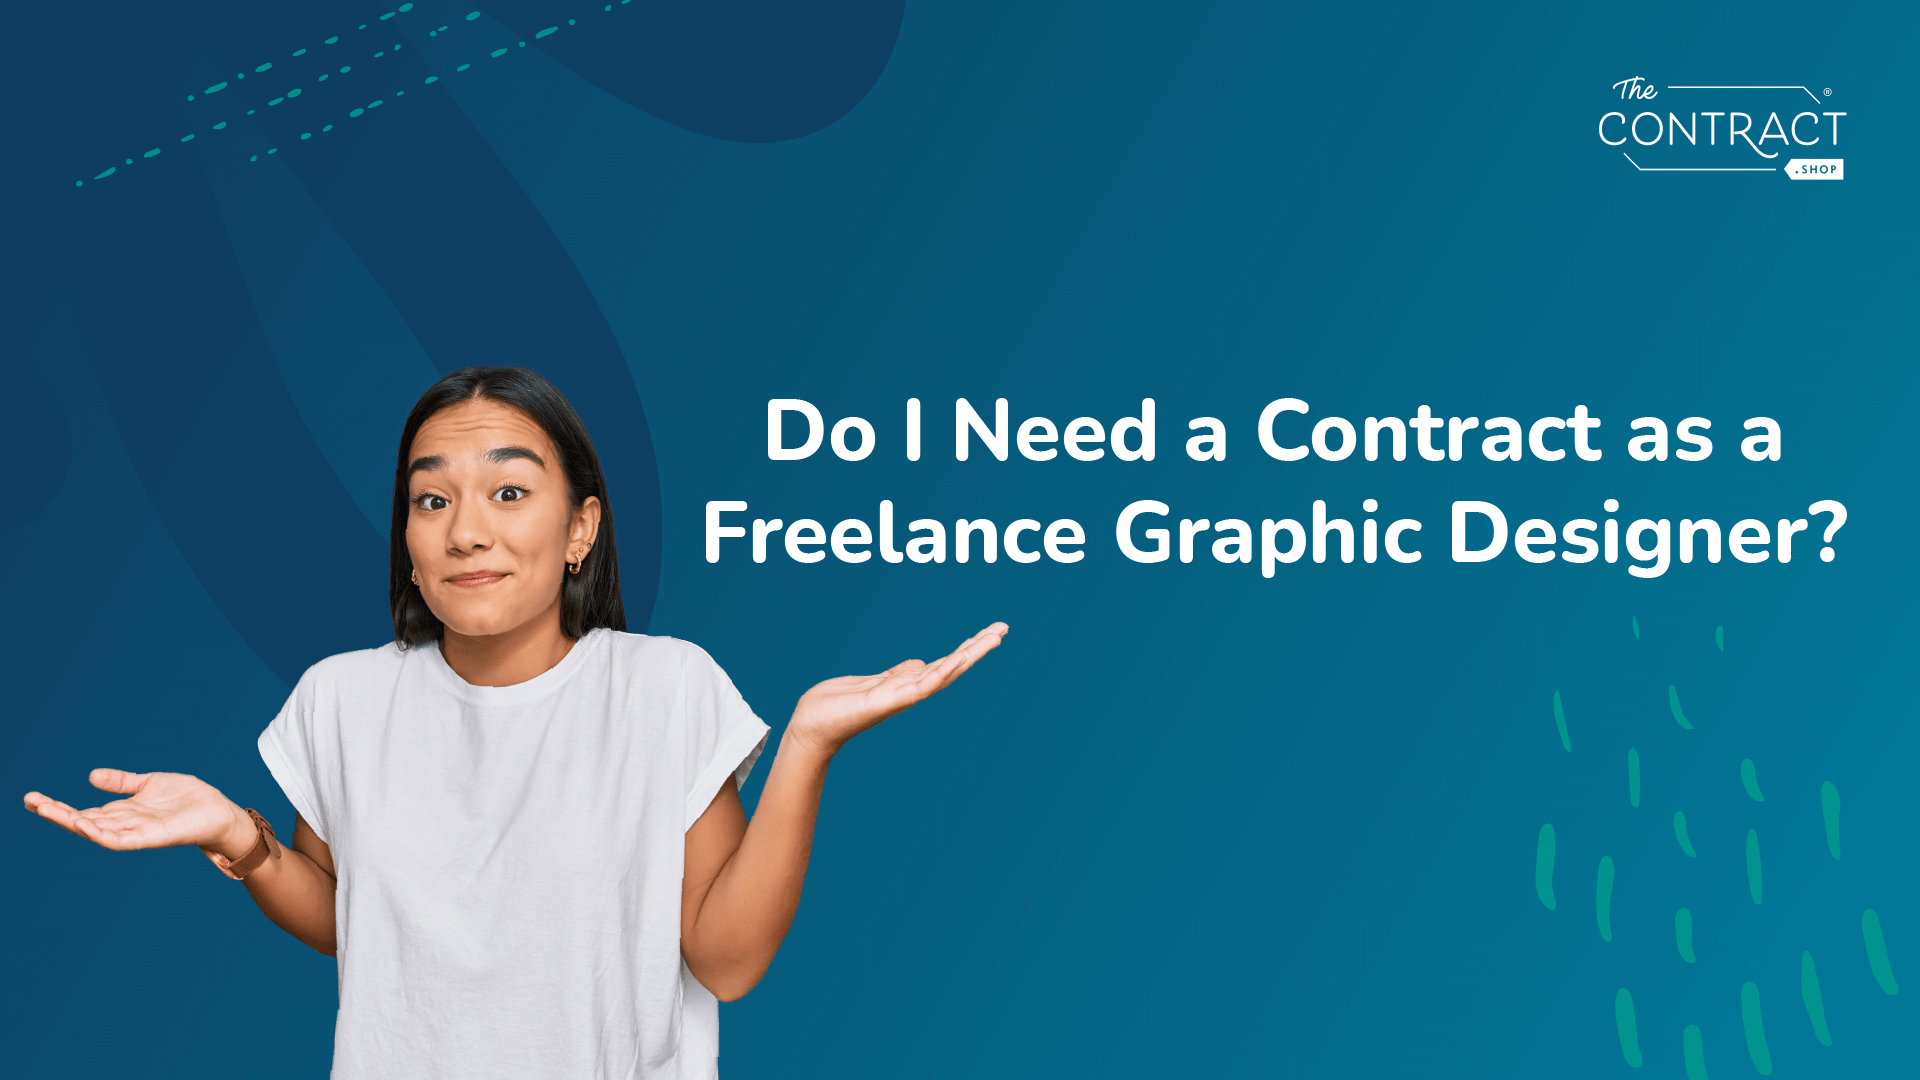 Do I Need a Contract as a Freelance Graphic Designer?